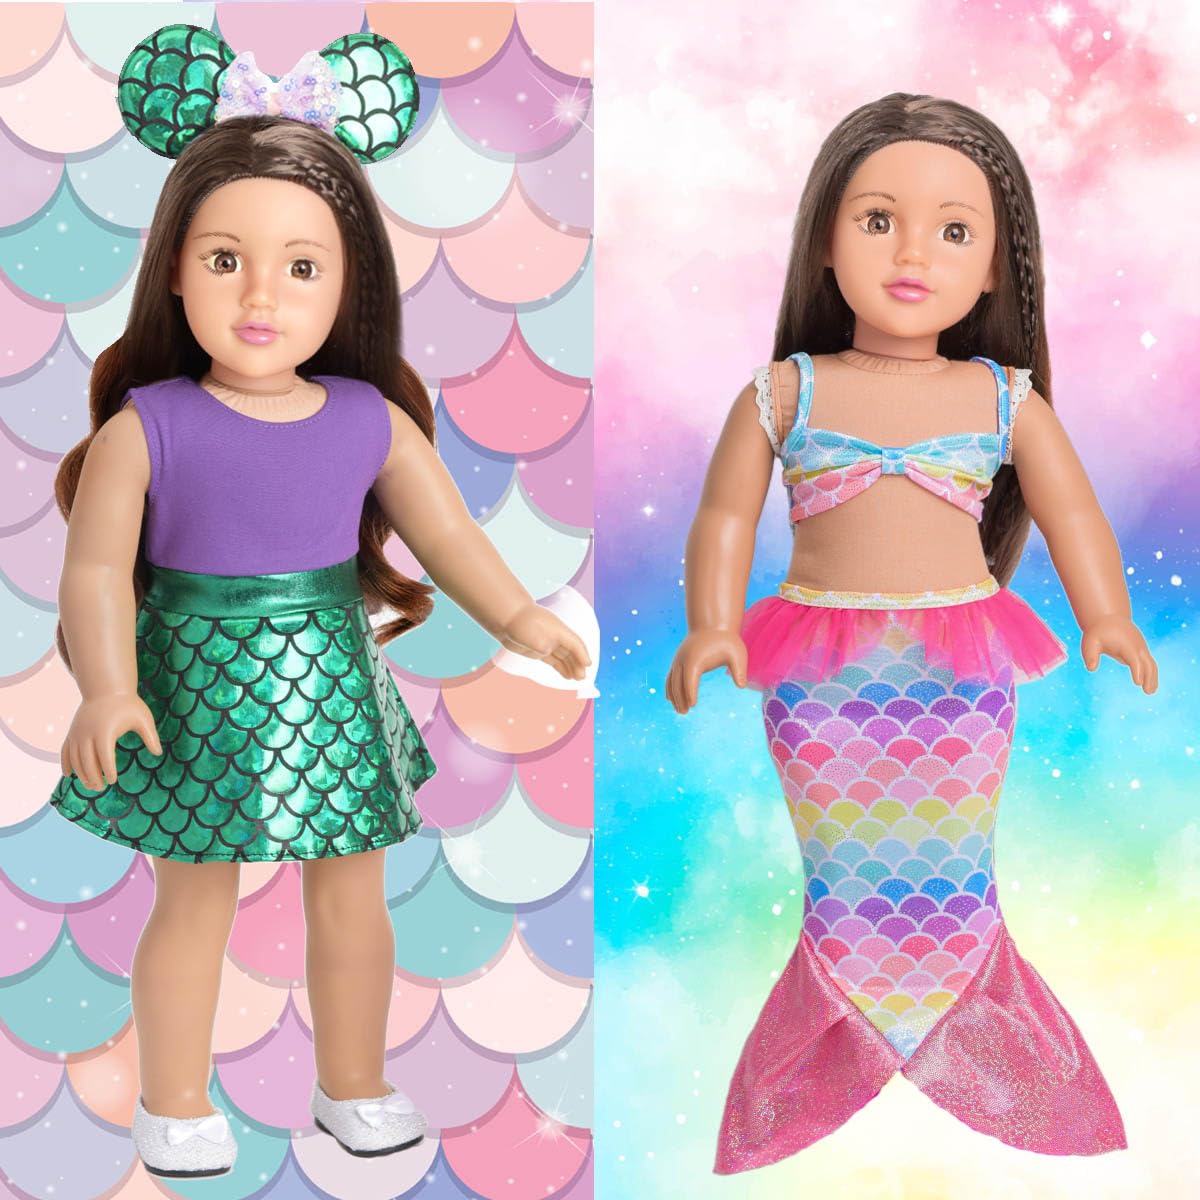 sweet dolly 18 Inch Mermaid Doll Clothes and Accessories Ariel's Journey Doll Suitcase Luggage Travel Play Set for 18 Inch Dolls